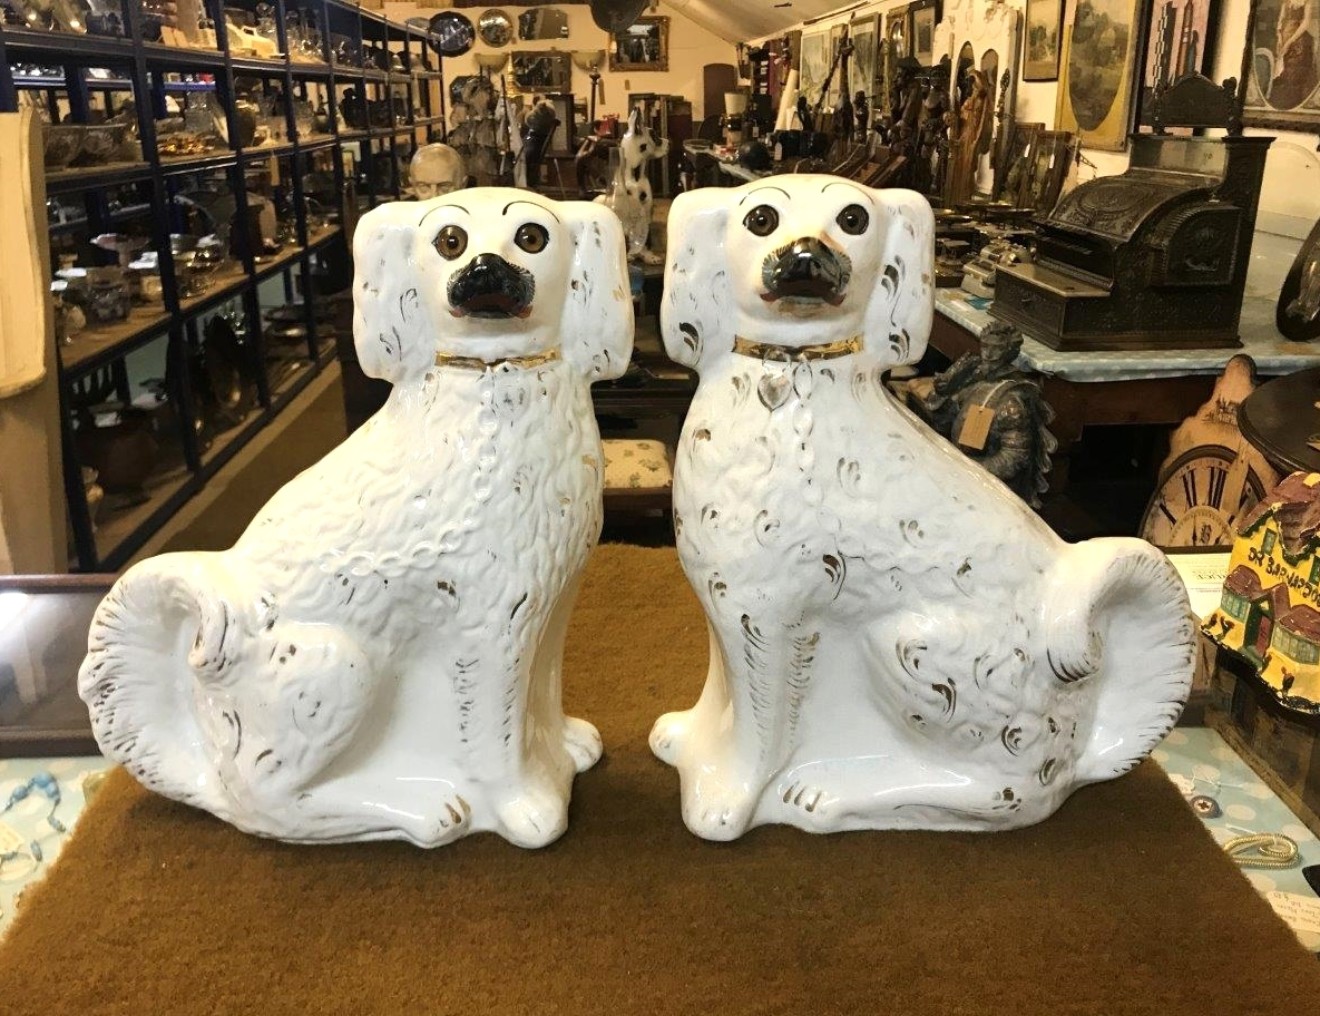 Pair of Staffordshire Pottery Spaniels "Wally Dogs"